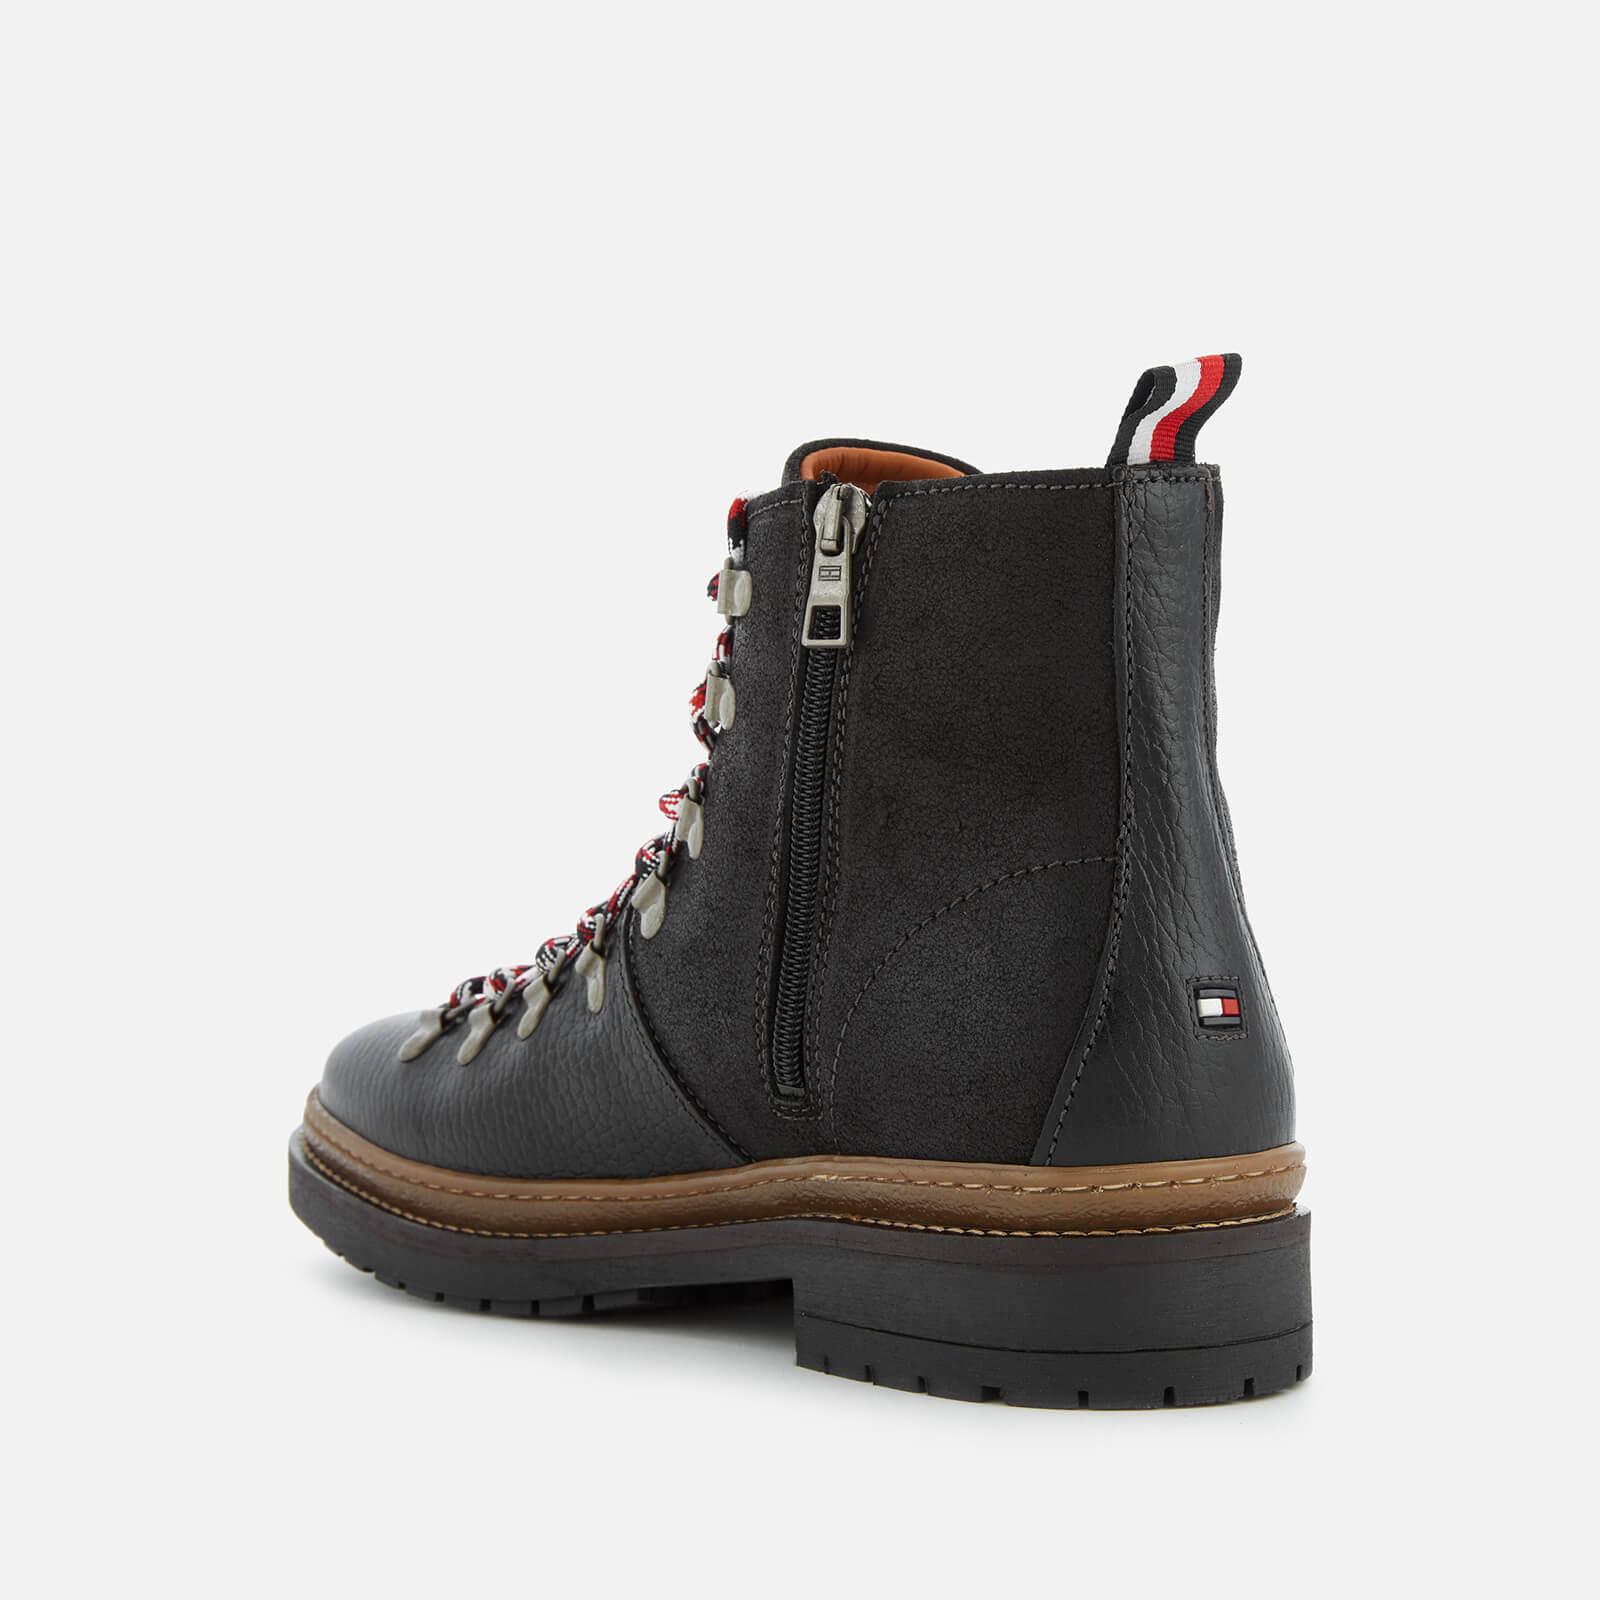 Buy > elevated boots > in stock